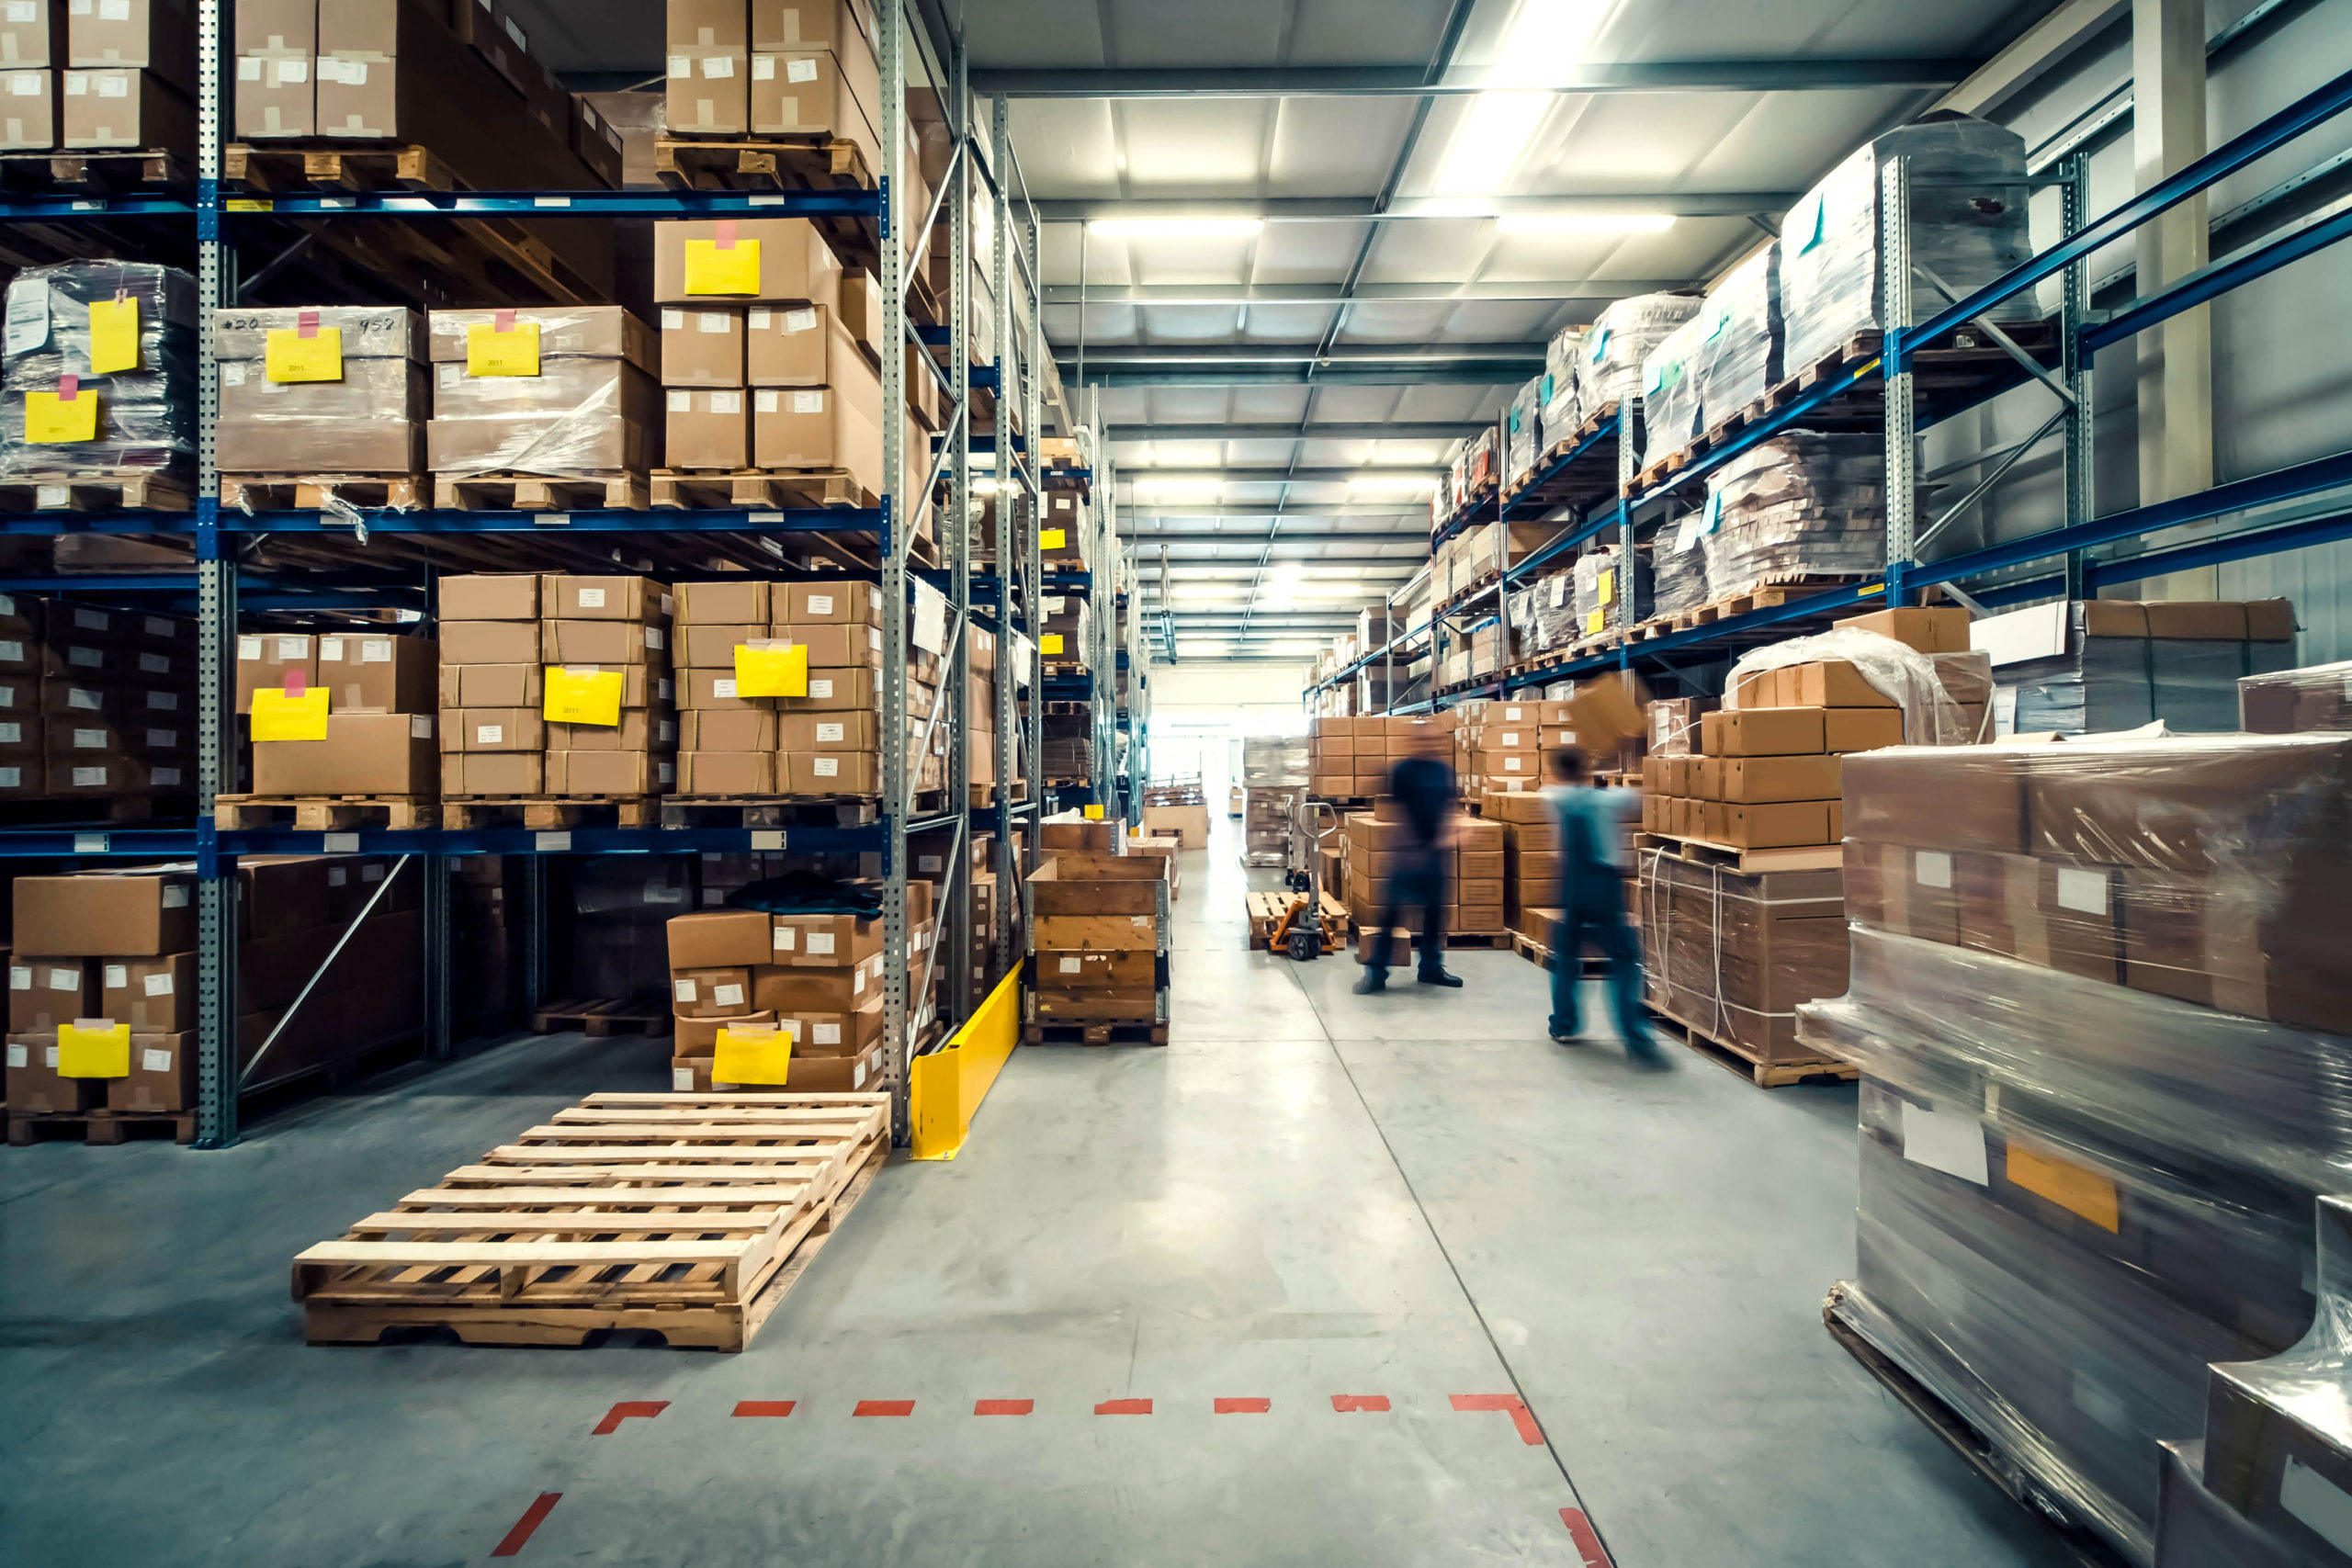 Warehousing space at record levels in second quarter - Chambers and Cook